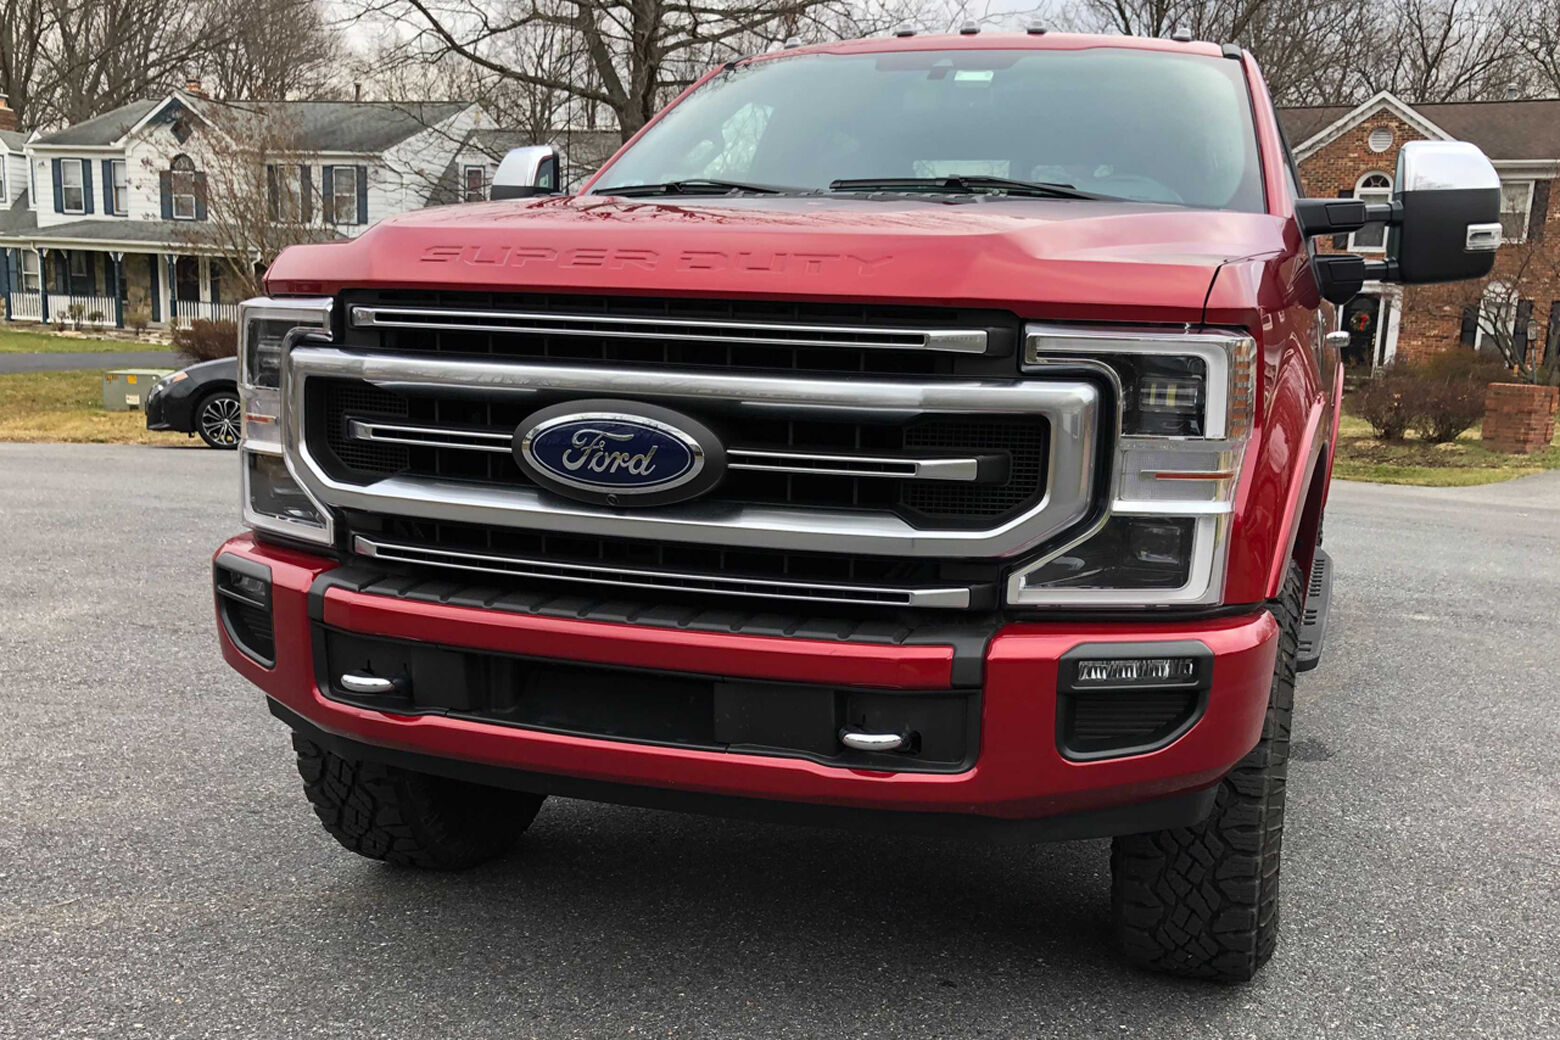 Exterior of the Ford Super Duty F-250